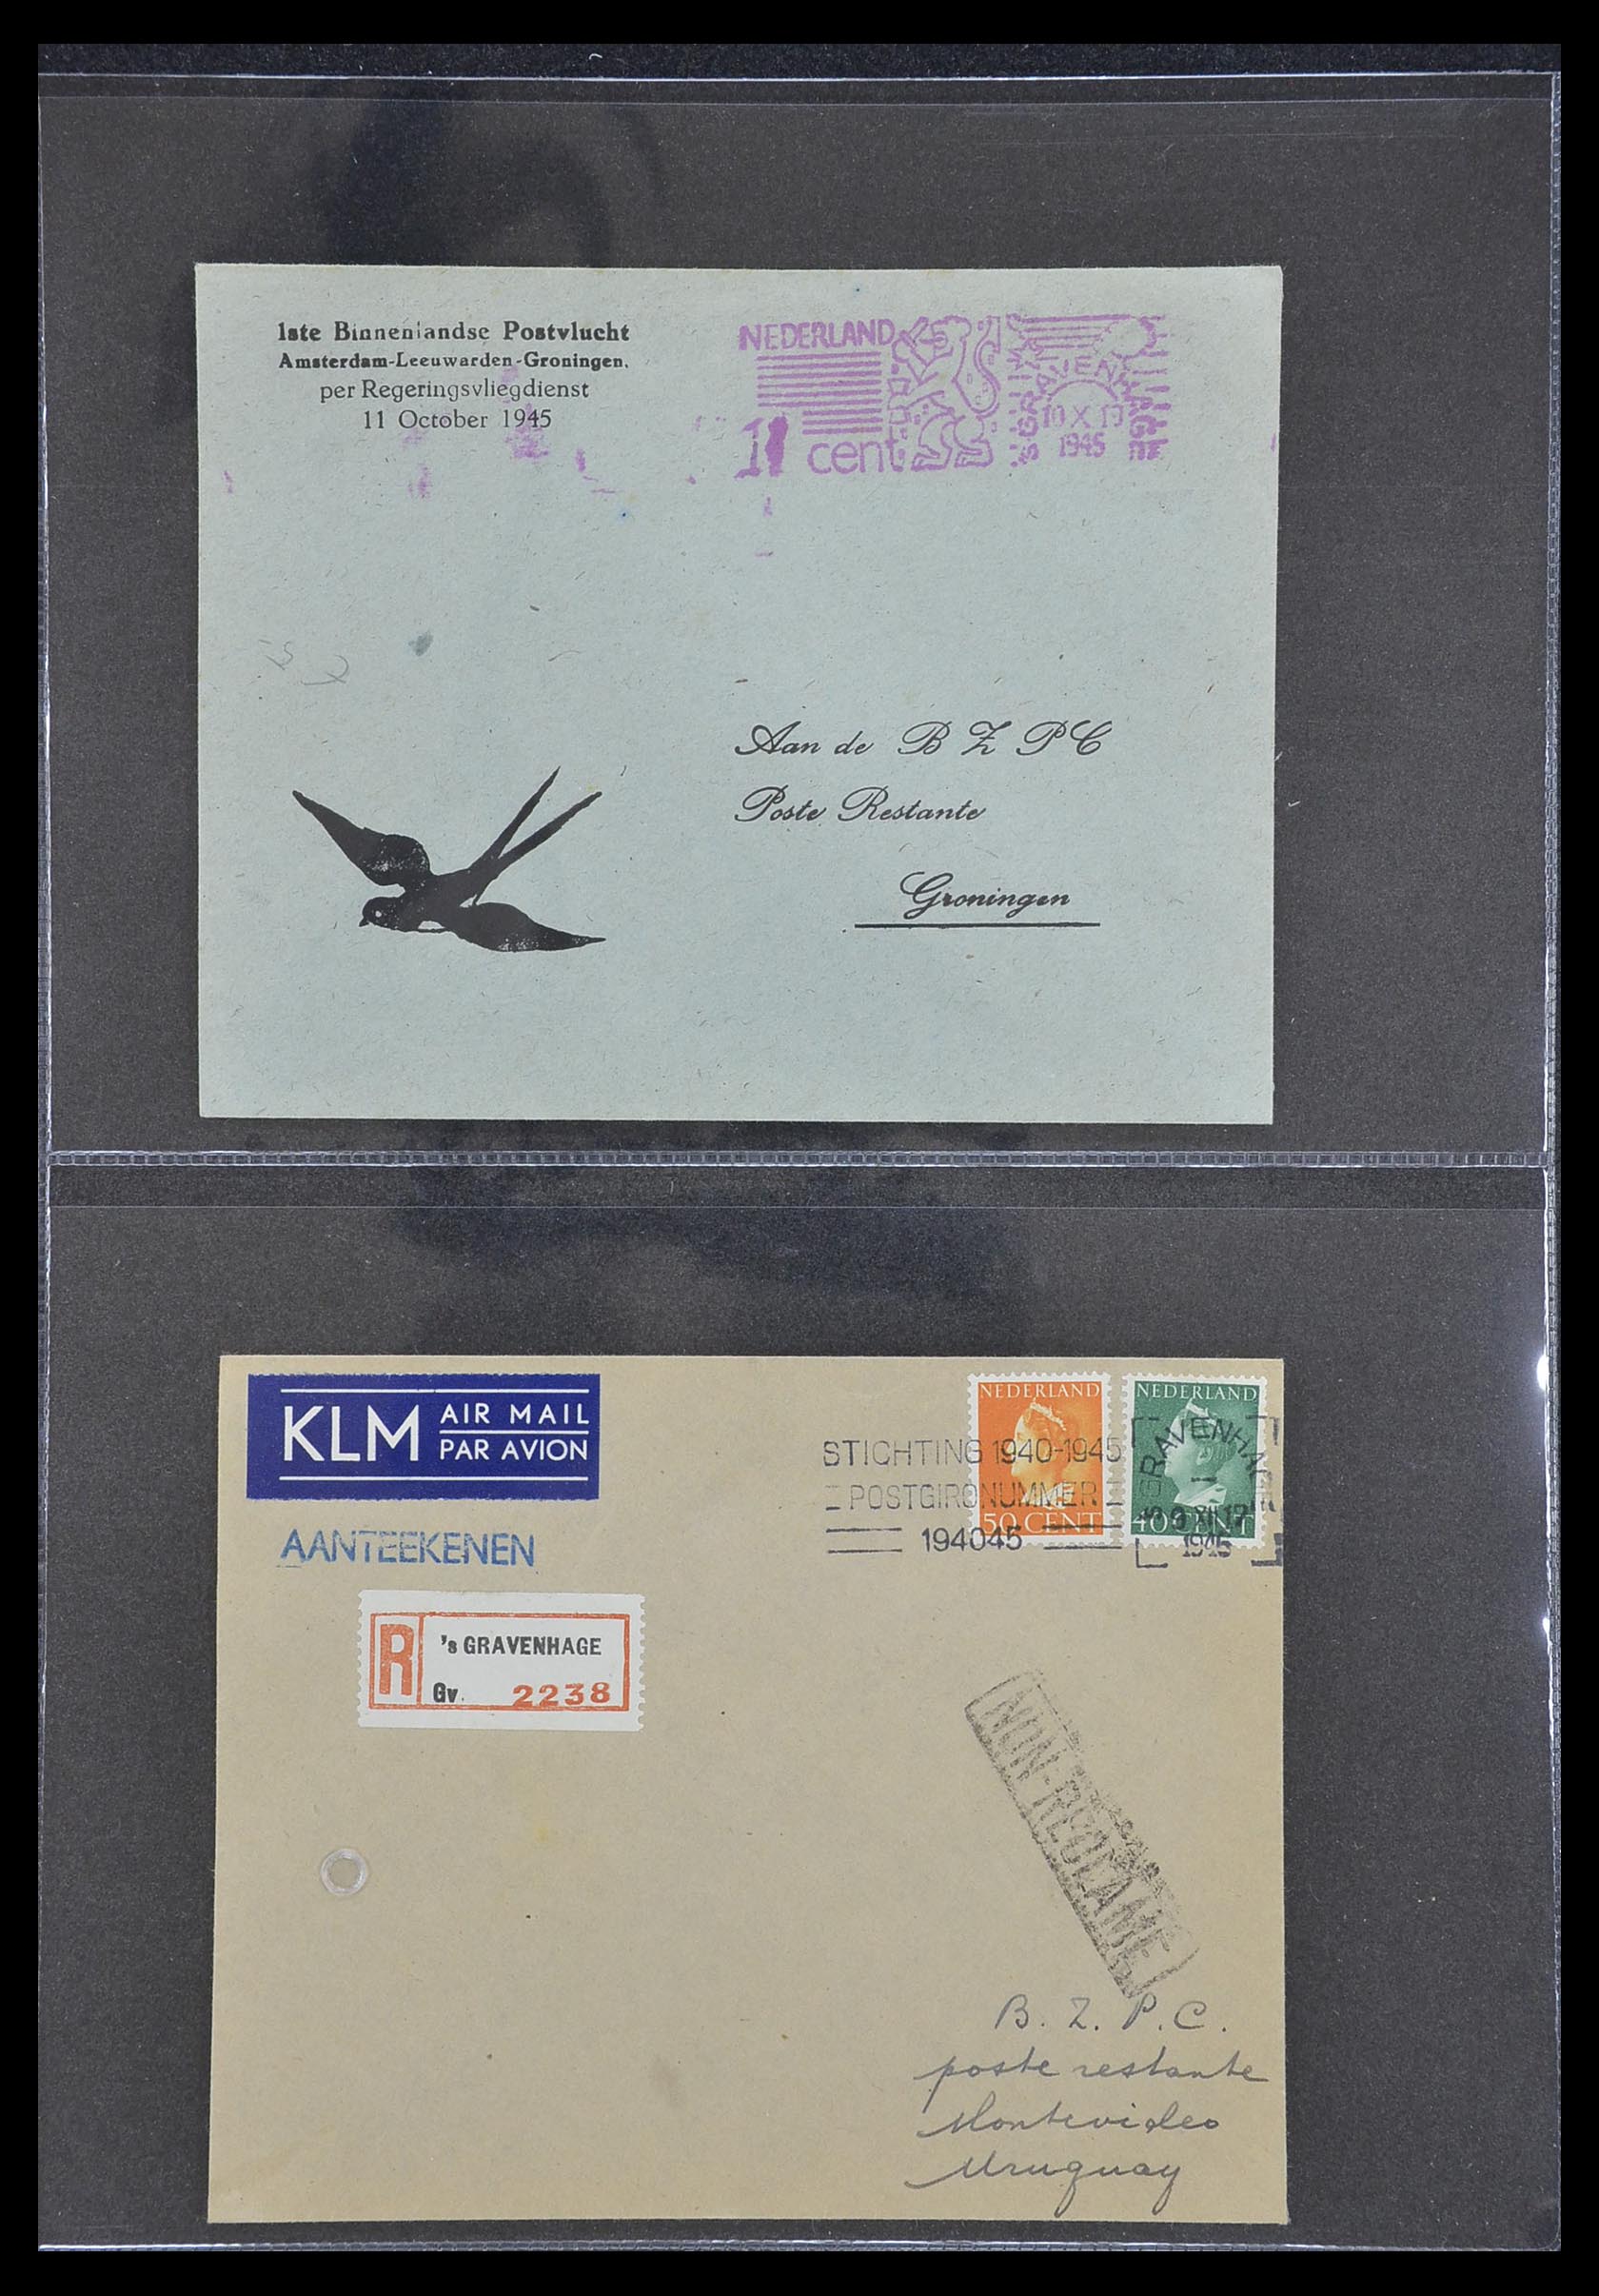 33330 155 - Stamp collection 33330 Netherlands covers 1852-1959.